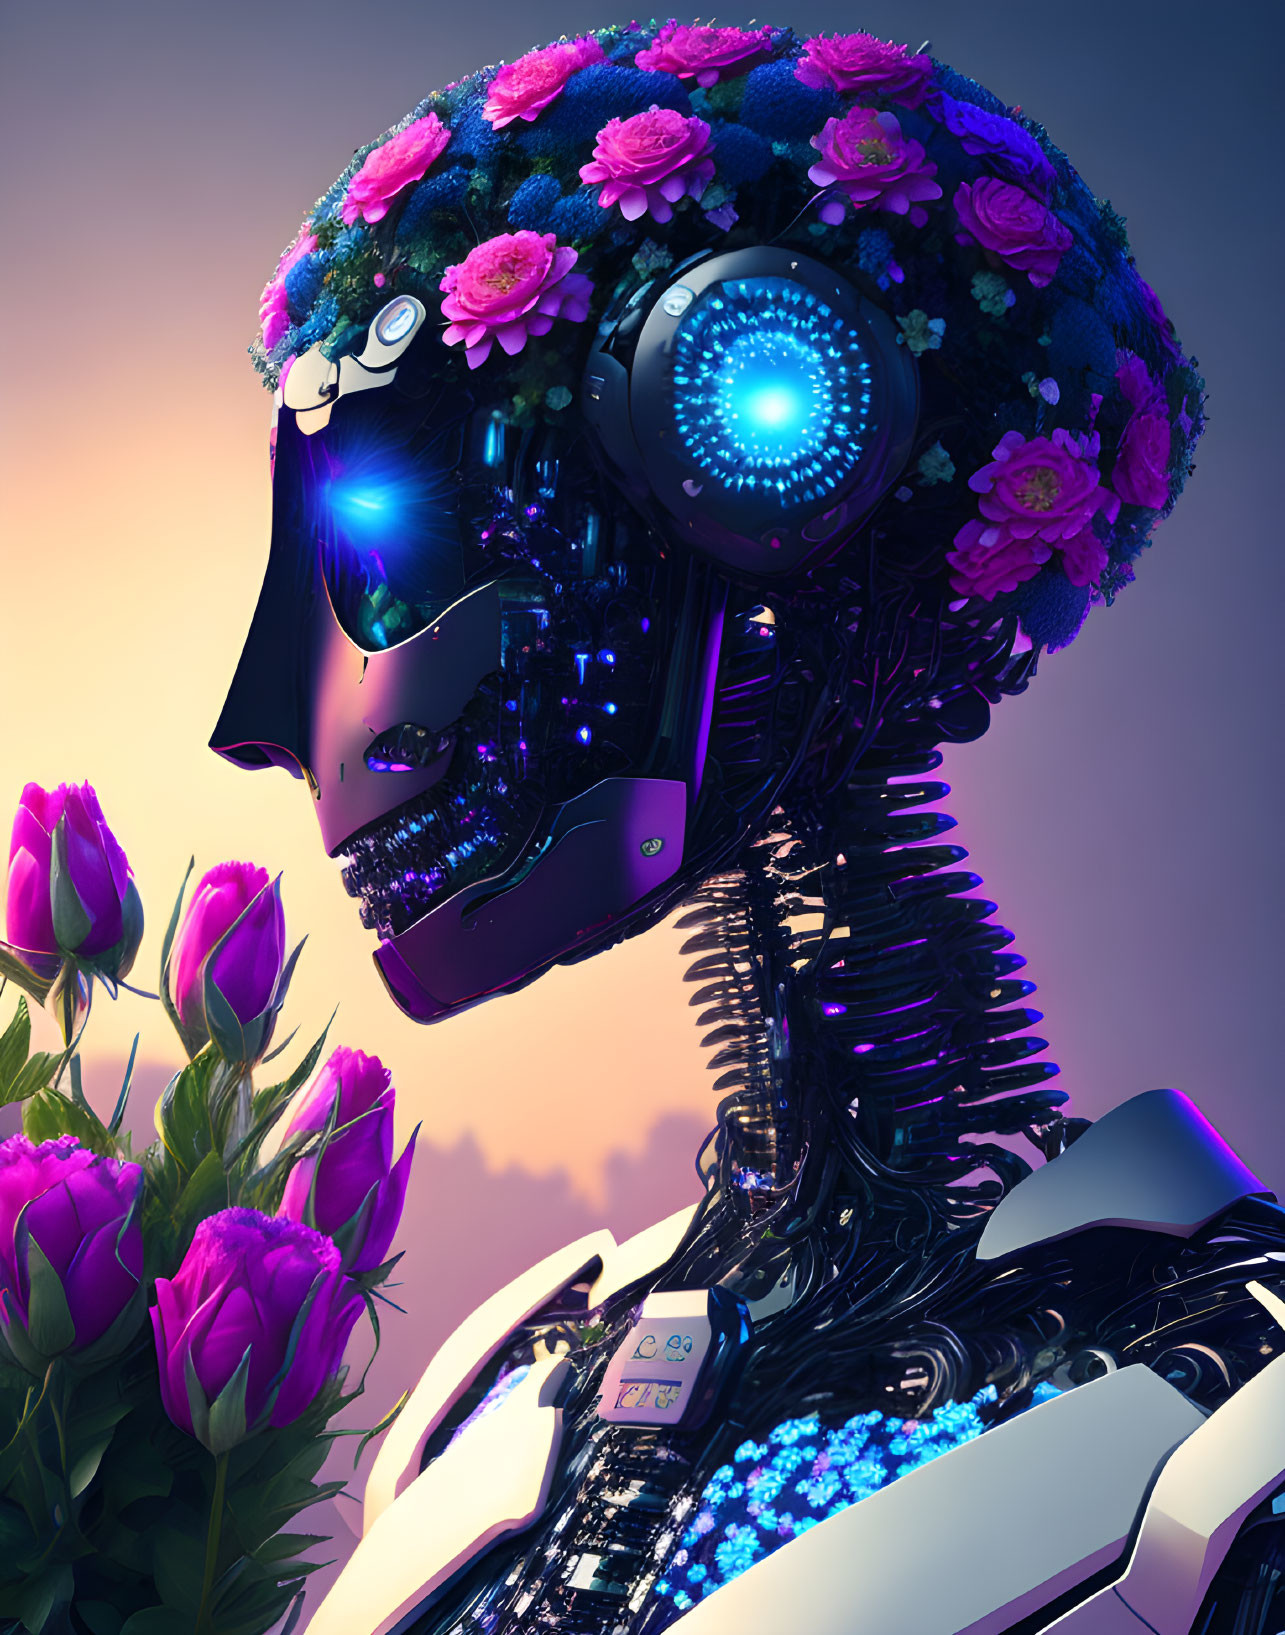 Skull-faced robotic figure with floral headpiece and glowing blue eyes on purple background